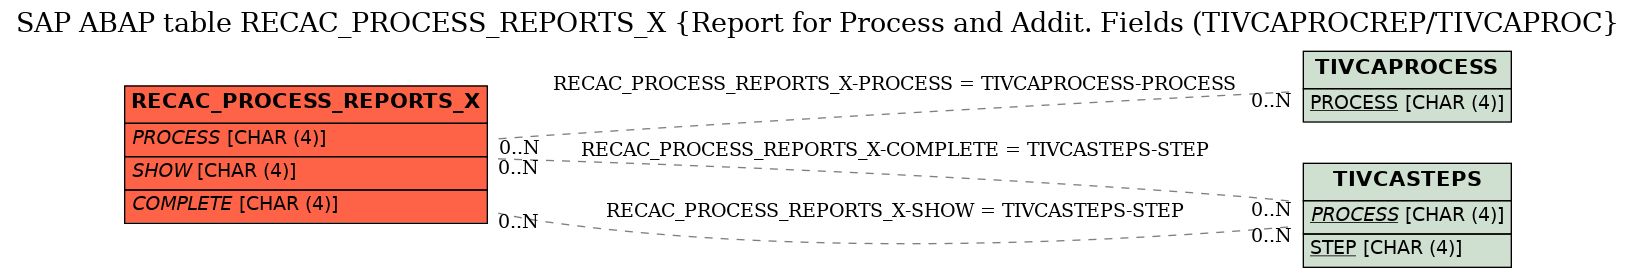 E-R Diagram for table RECAC_PROCESS_REPORTS_X (Report for Process and Addit. Fields (TIVCAPROCREP/TIVCAPROC)